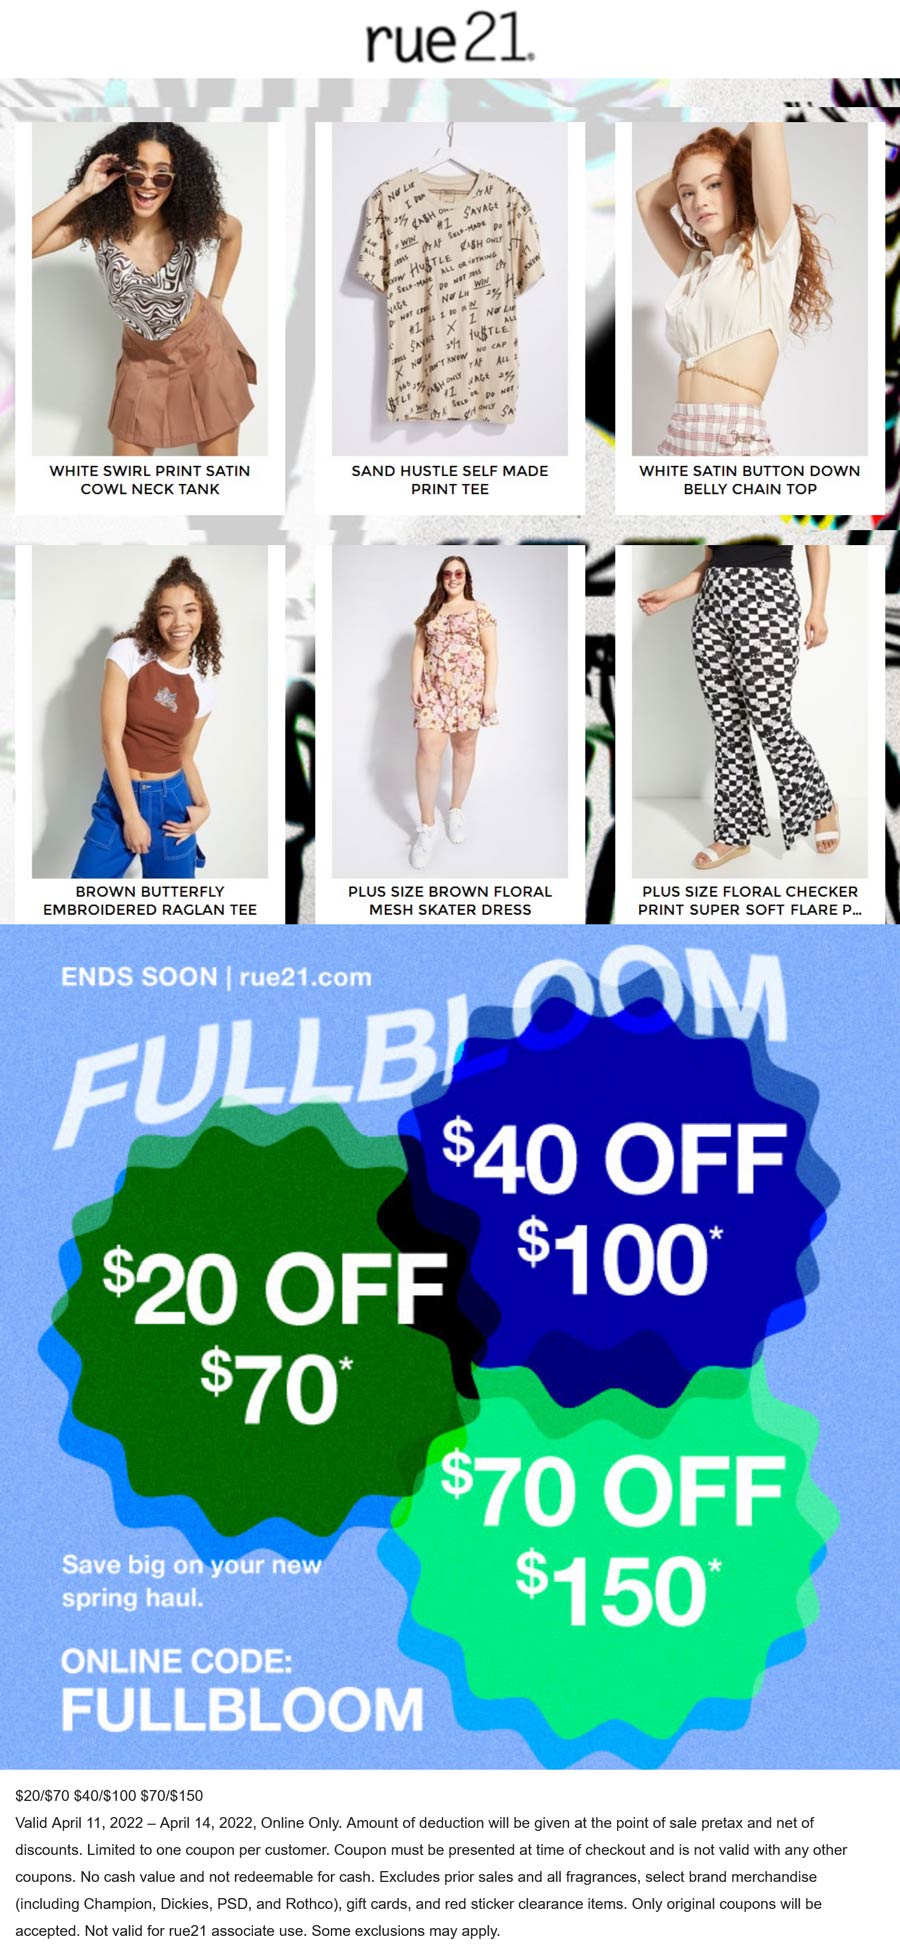 rue21 stores Coupon  $20-$70 off $70 online at rue21 via promo code FULLBLOOM #rue21 